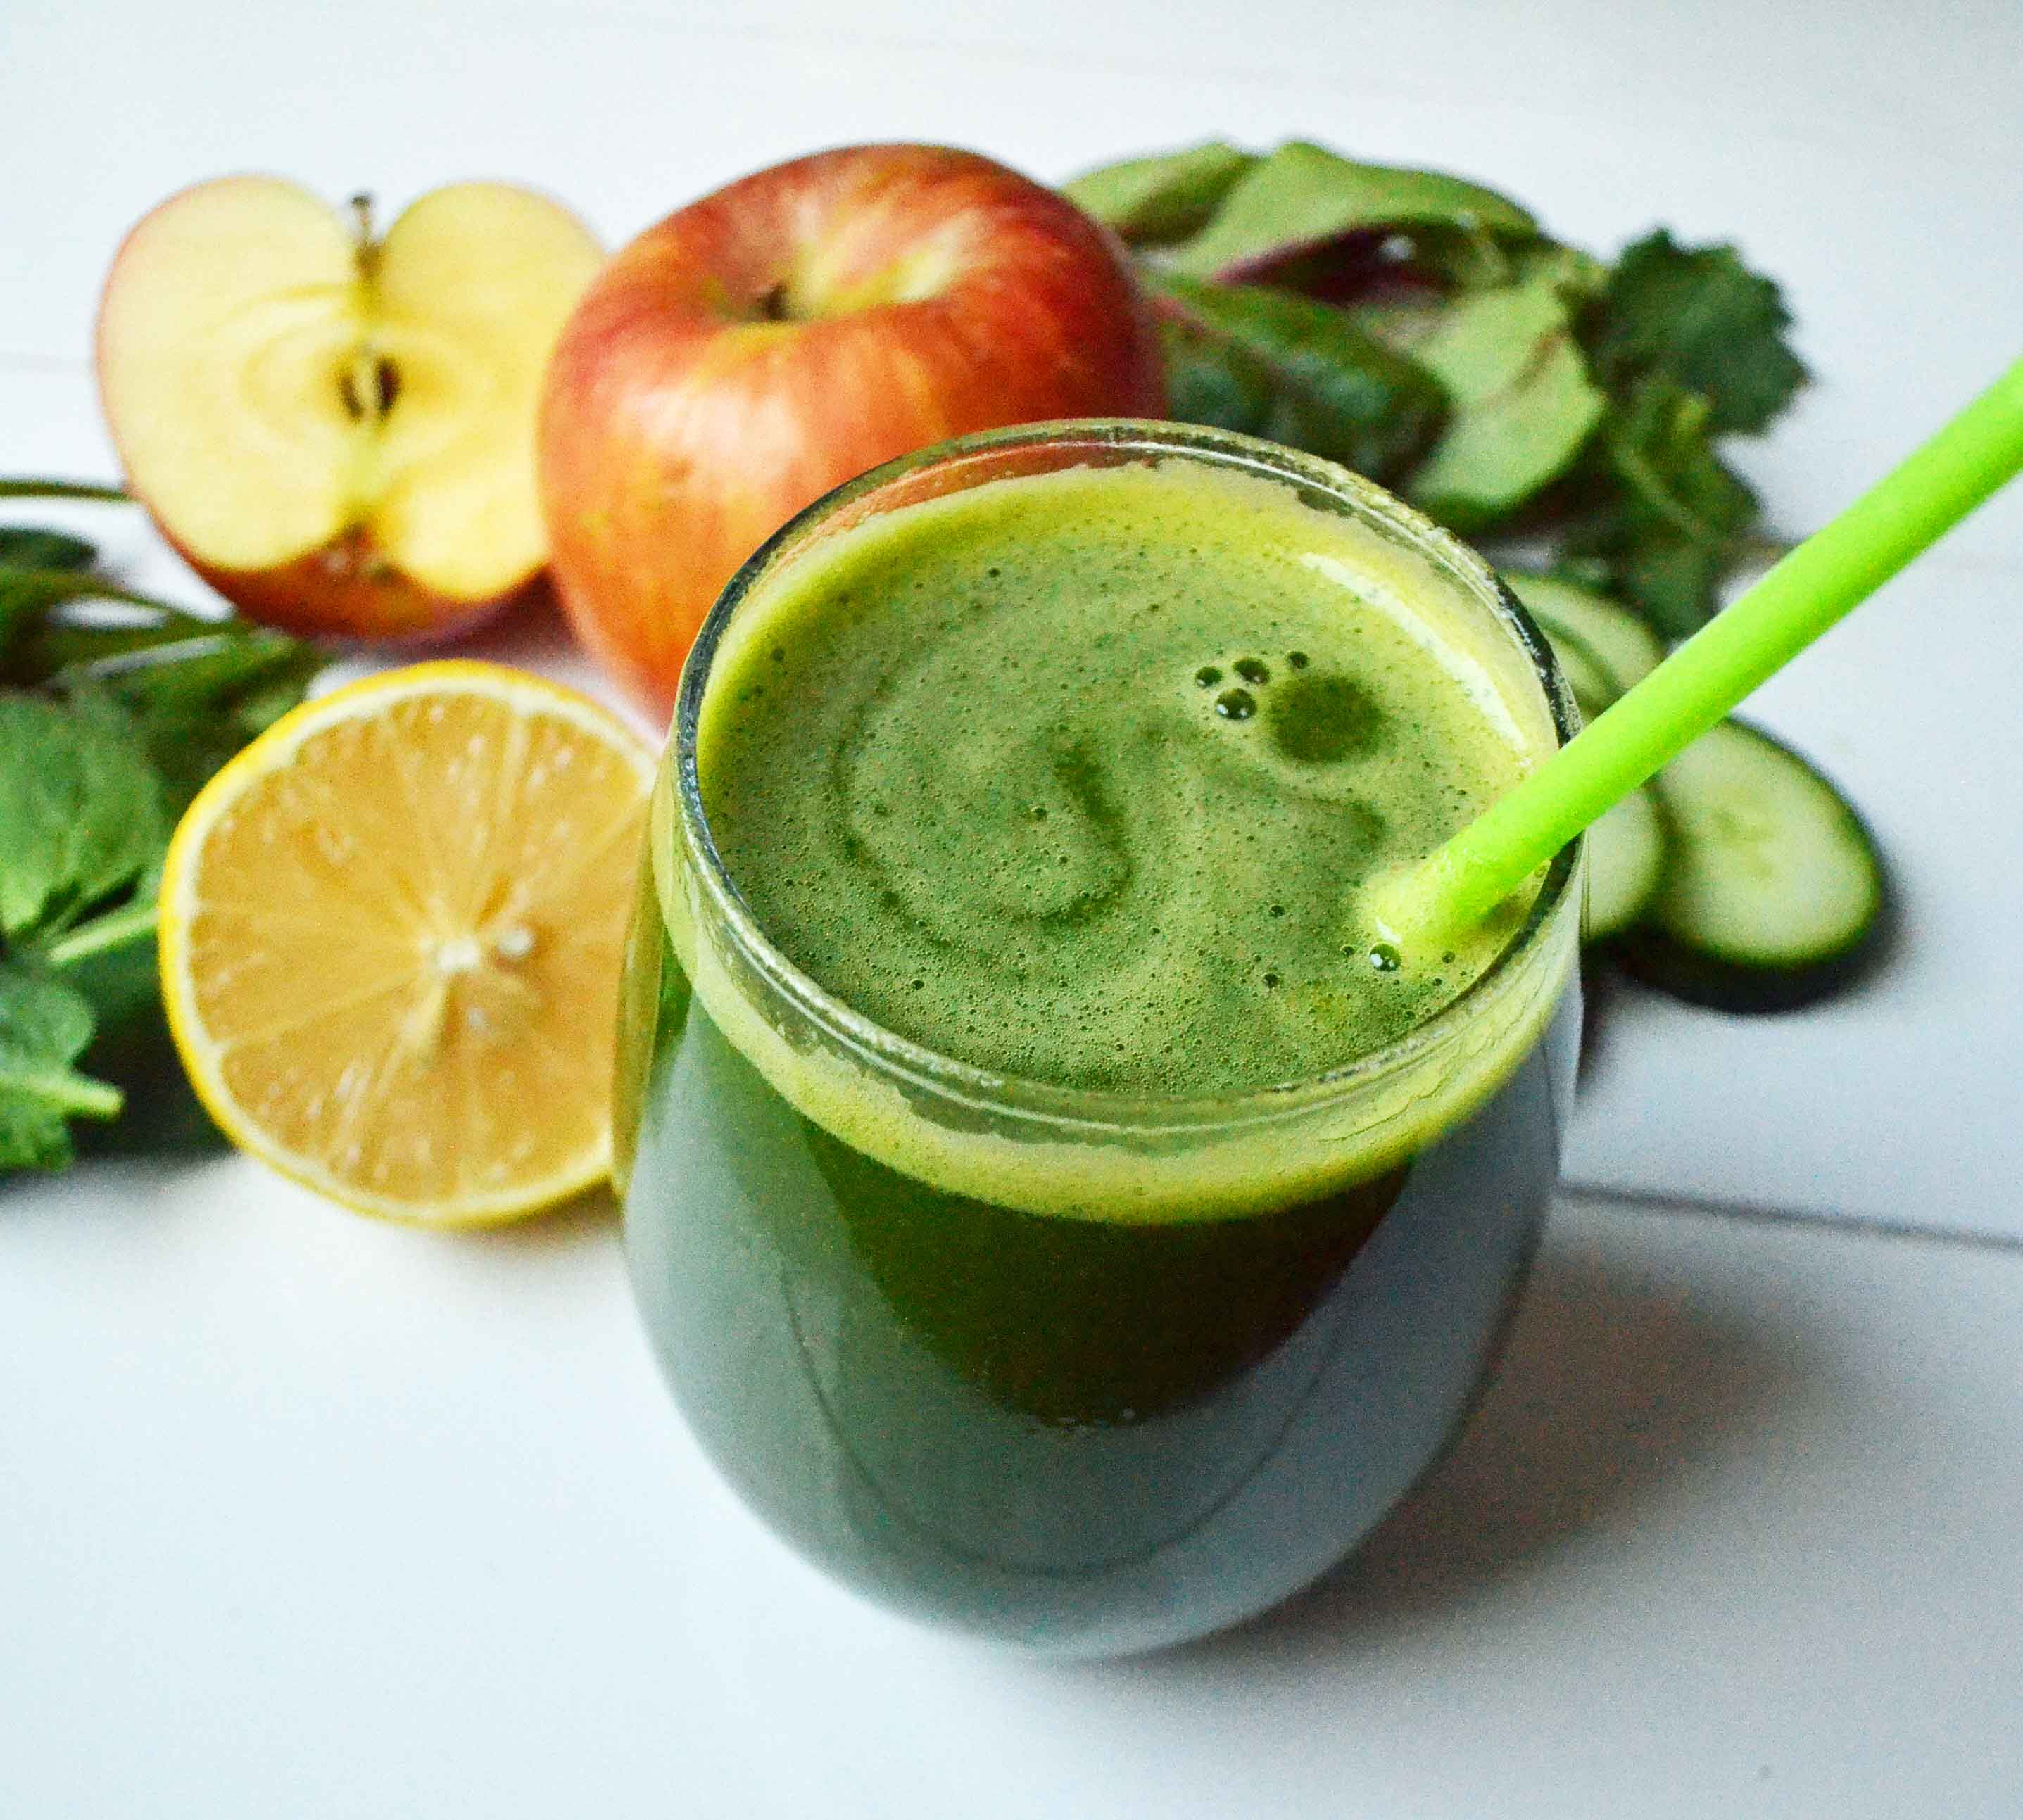 Youthful Glow Green Smoothie by Modern Honey. Healthy green smoothie made with whole foods -- spinach, apple, lemon, kale, cucumber, and banana.